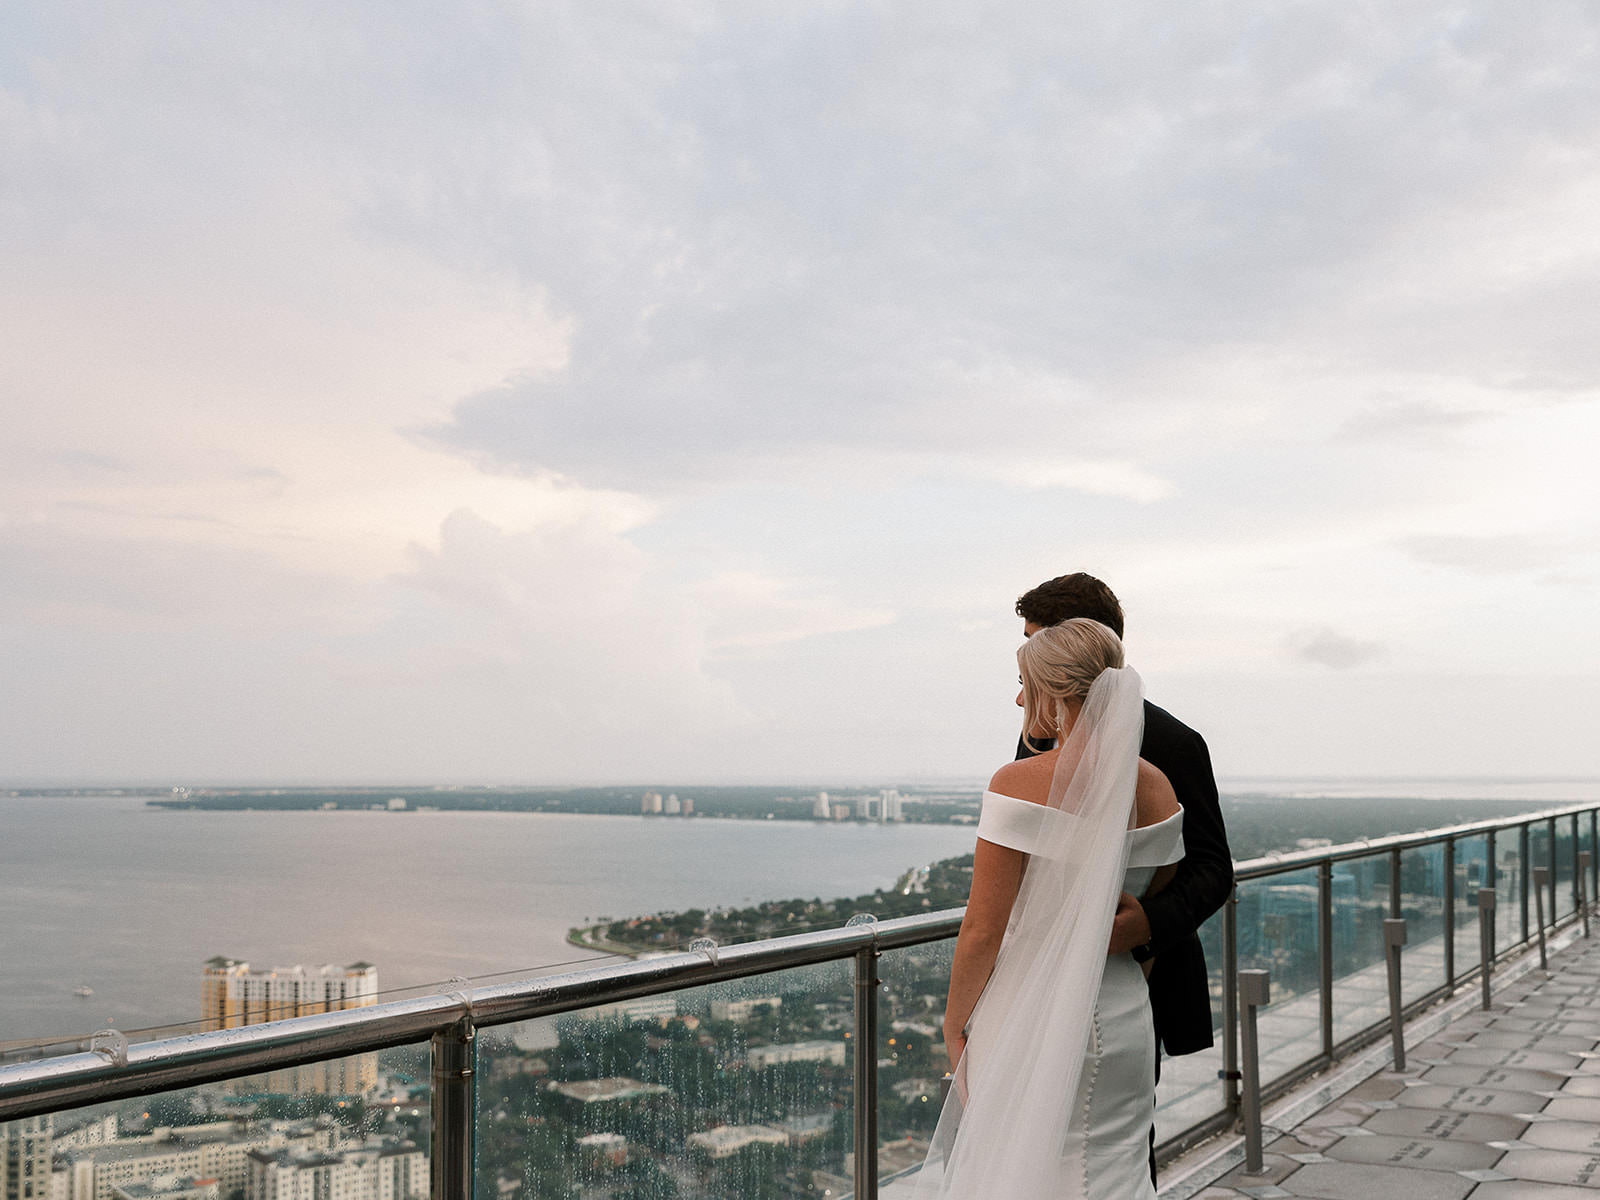 Romantic Rooftop Kiss Wedding Portrait | Downtown Venue The Tampa Club | Planner Perfecting the Plan